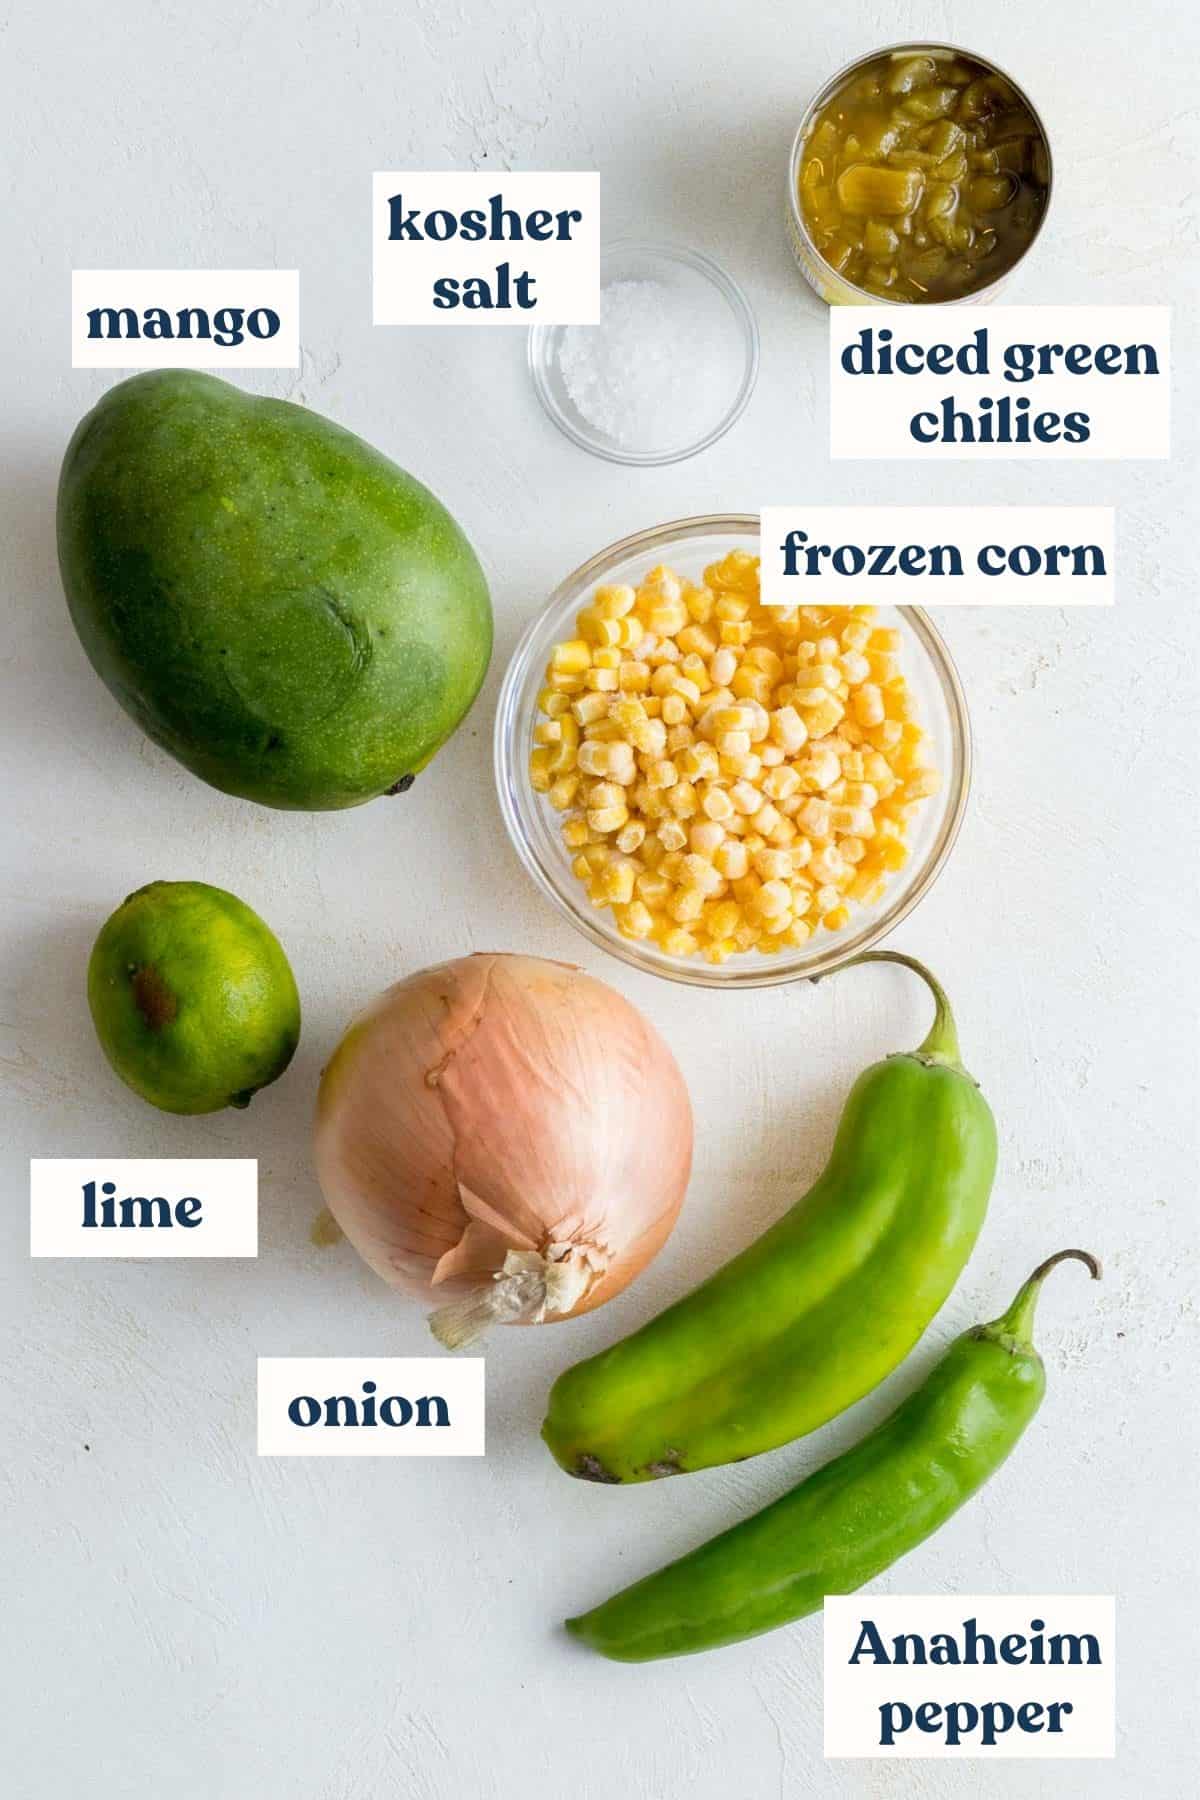 Recipe ingredients laid out and labeled on white background.